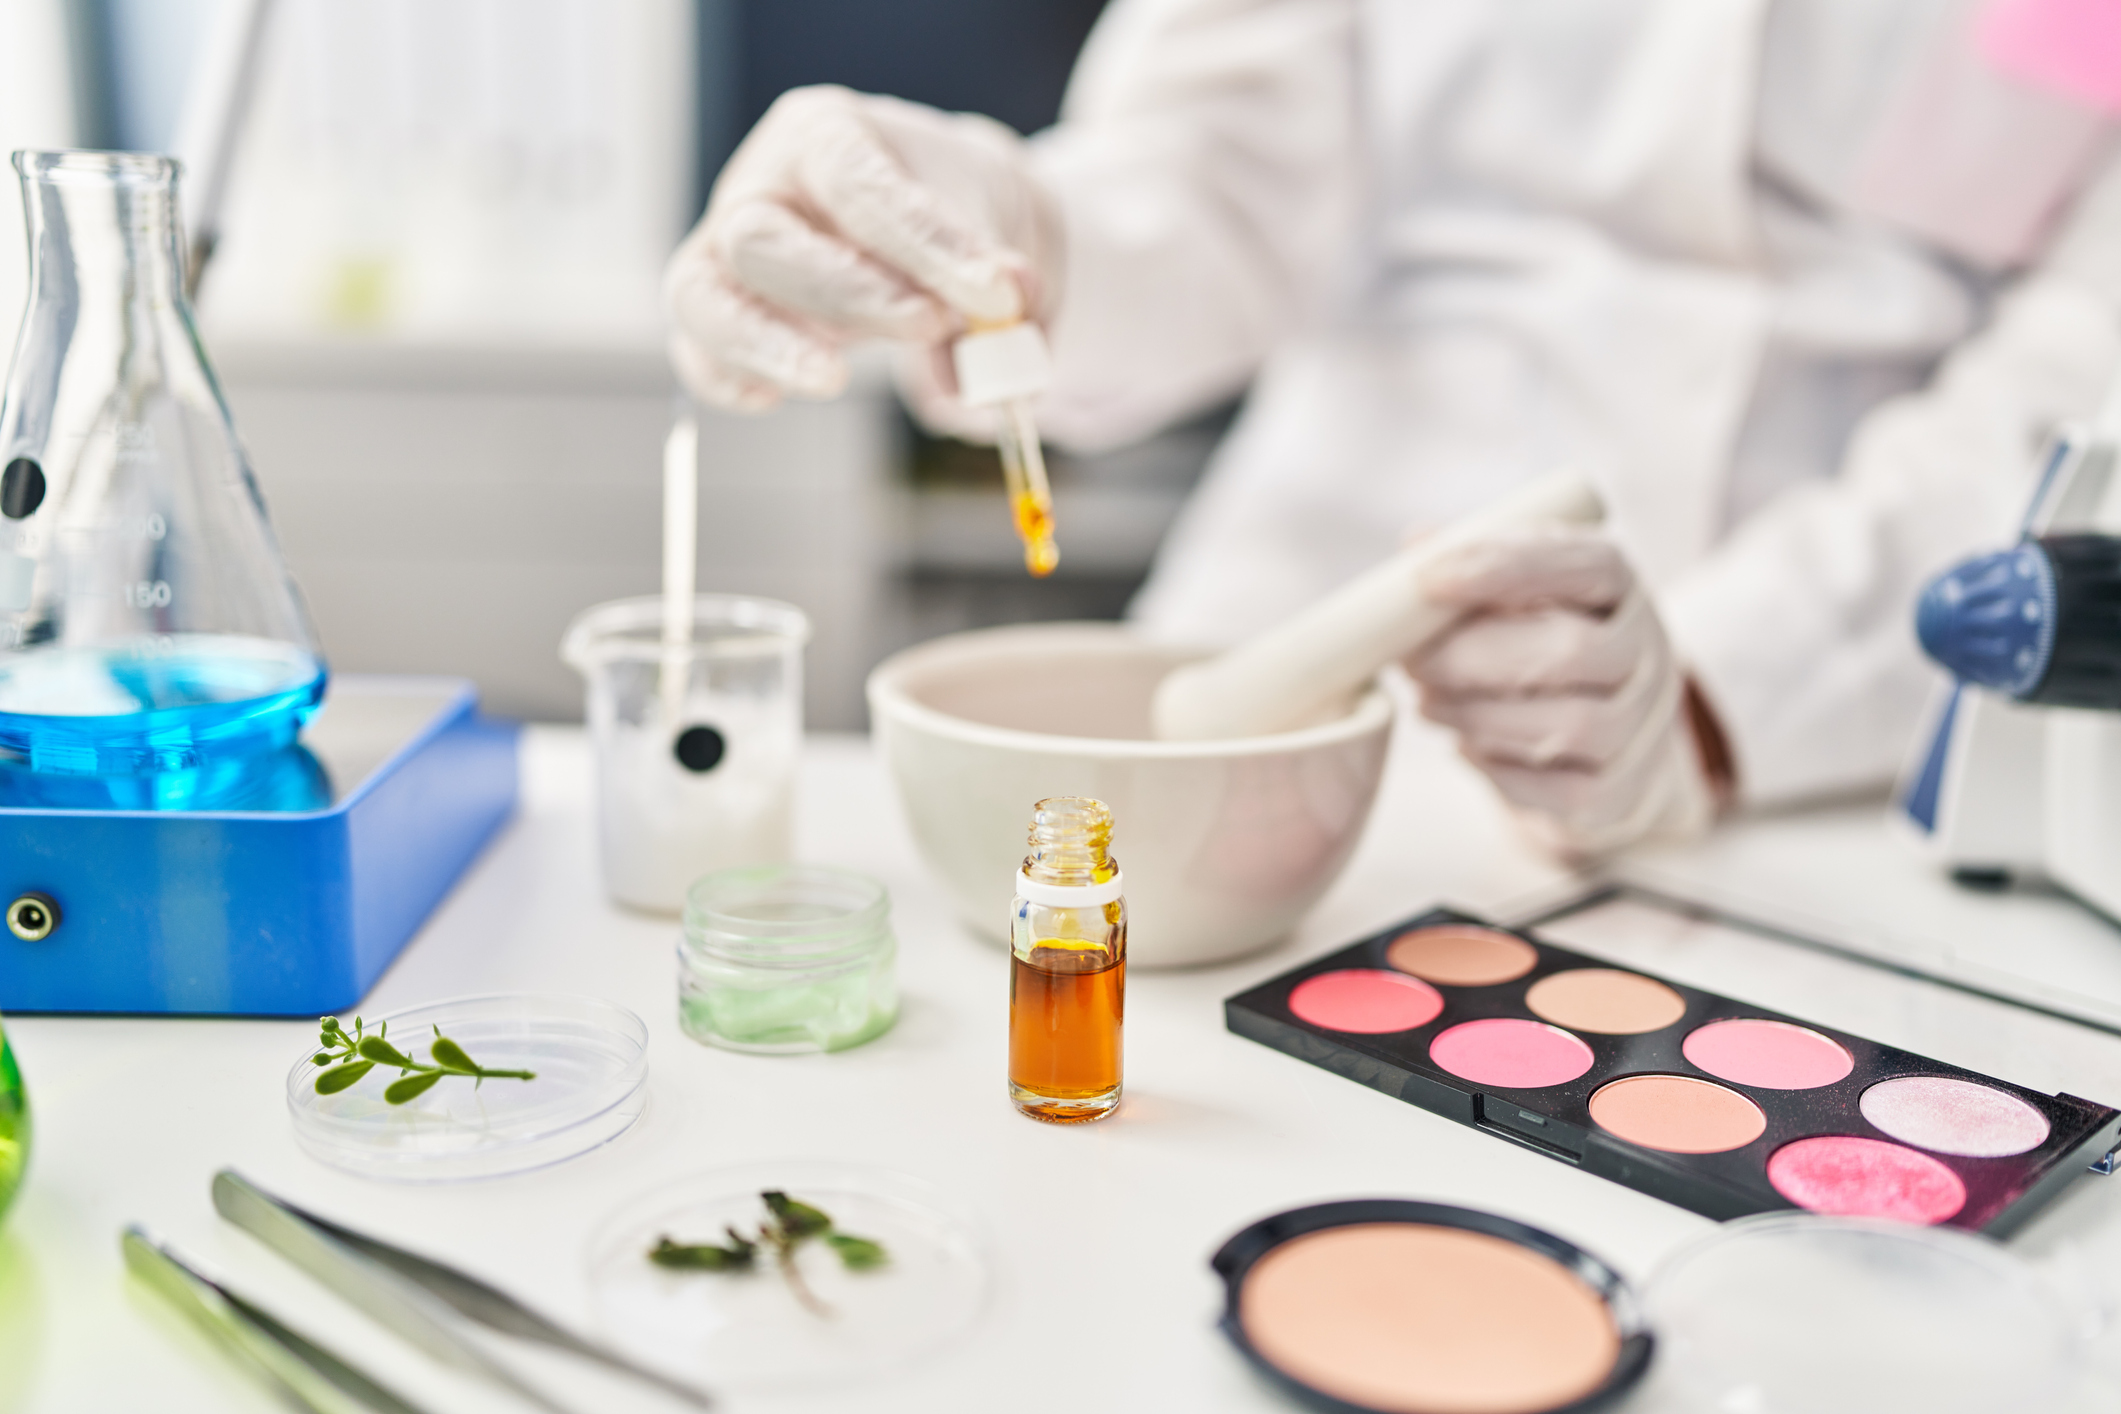 Previewing FDA’s Cosmetic Direct Portal and SPL Guidelines